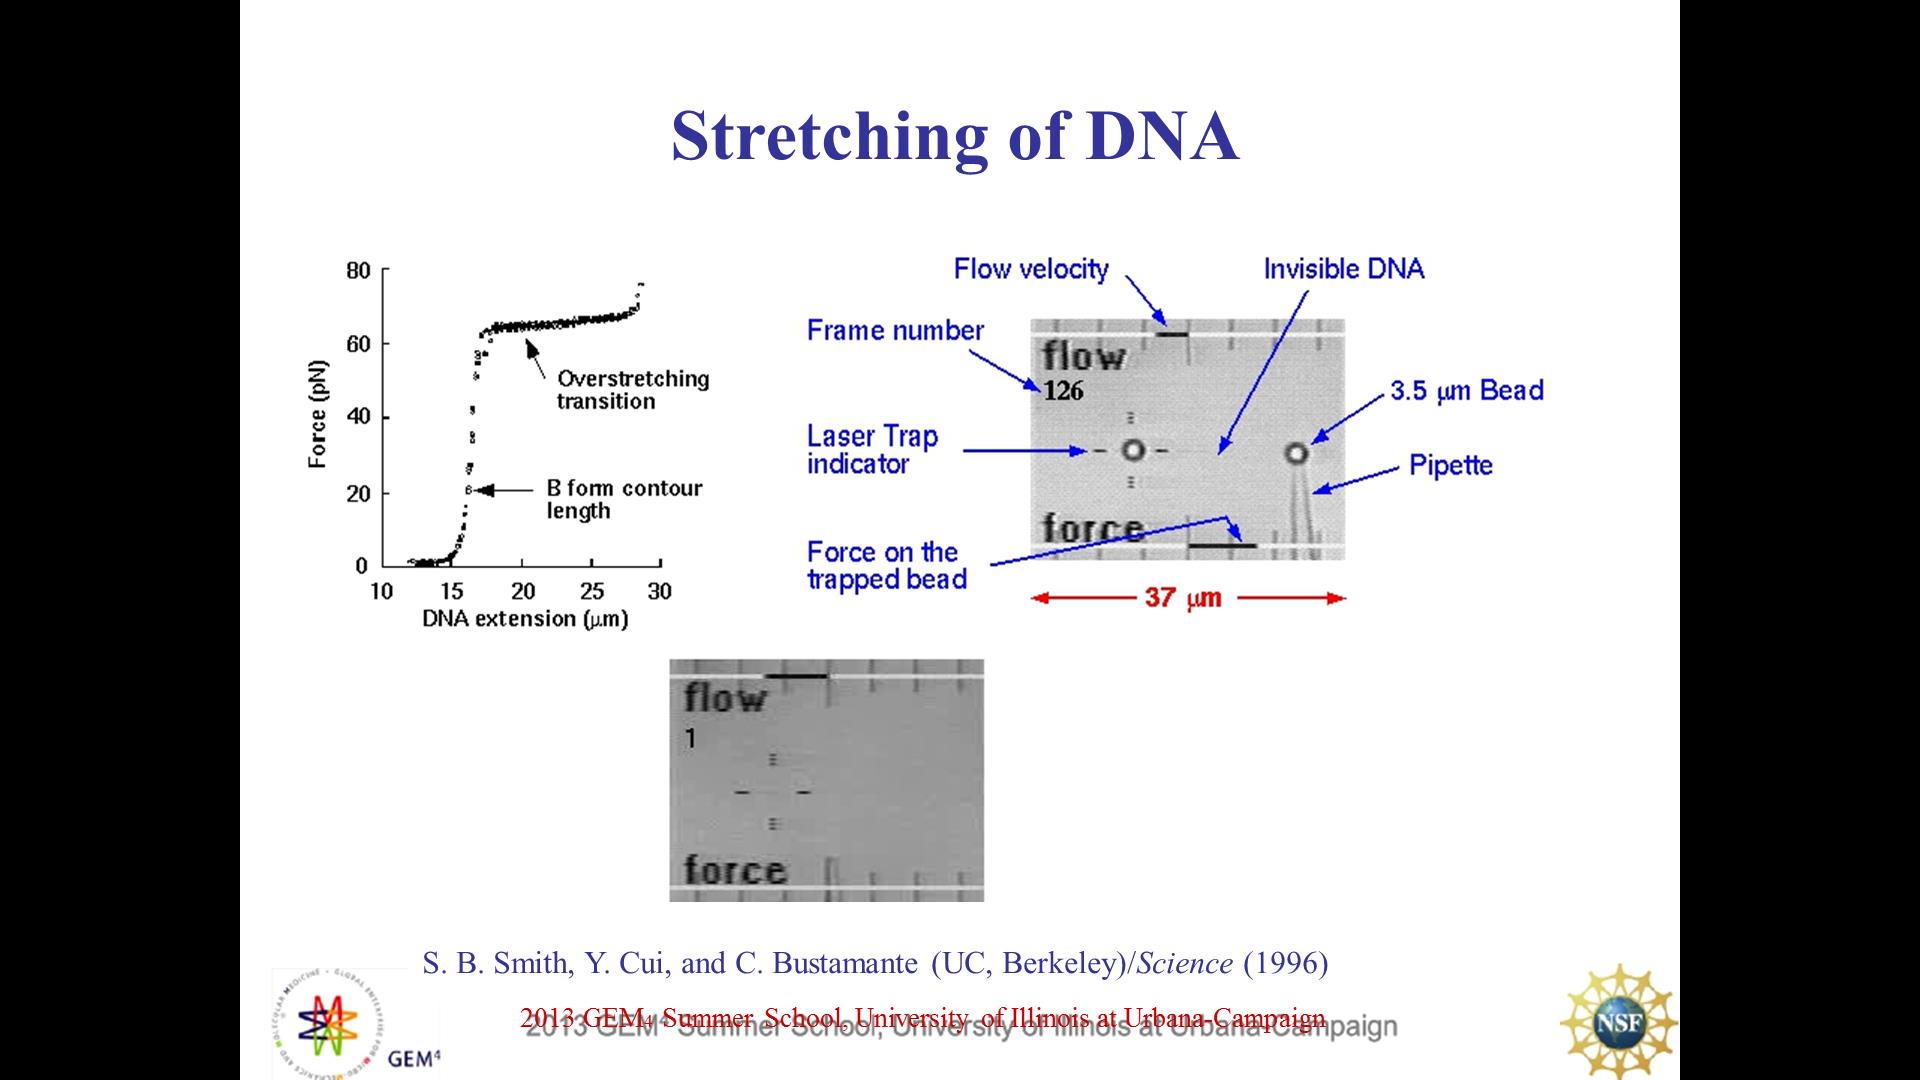 Stretching of DNA